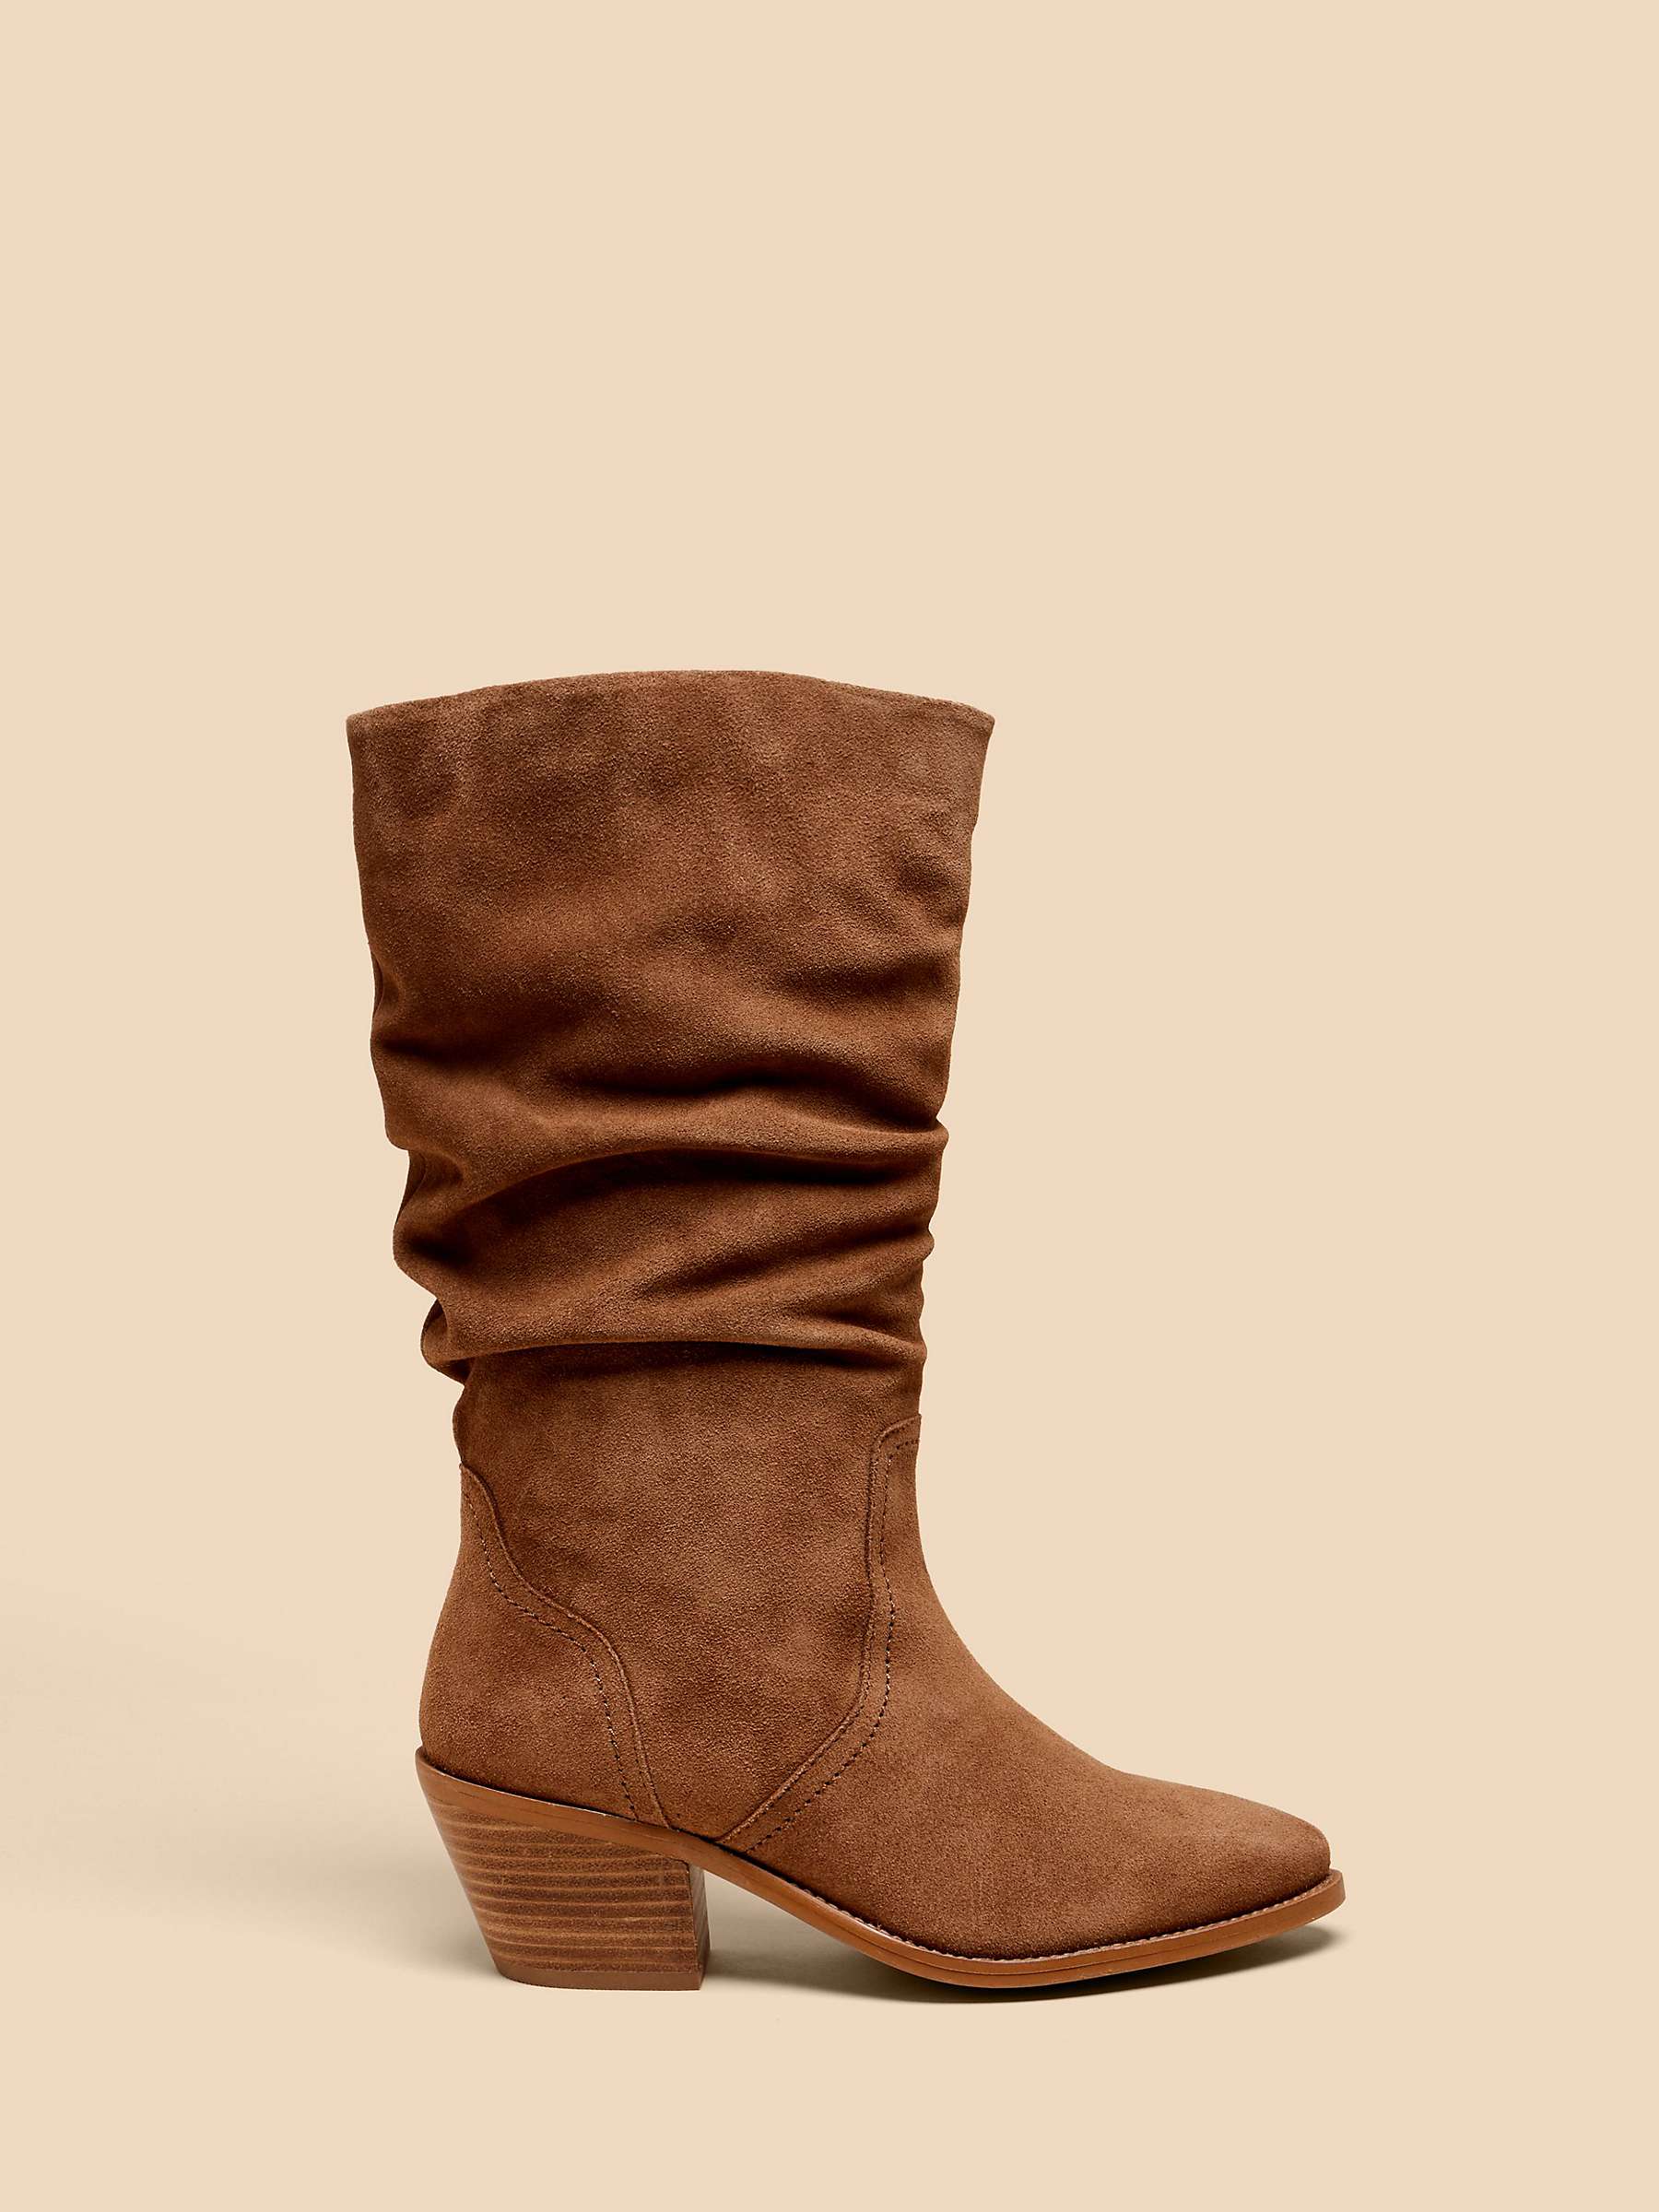 Buy White Stuff Azalea Suede Mid Slouch Boots, Light Tan Online at johnlewis.com